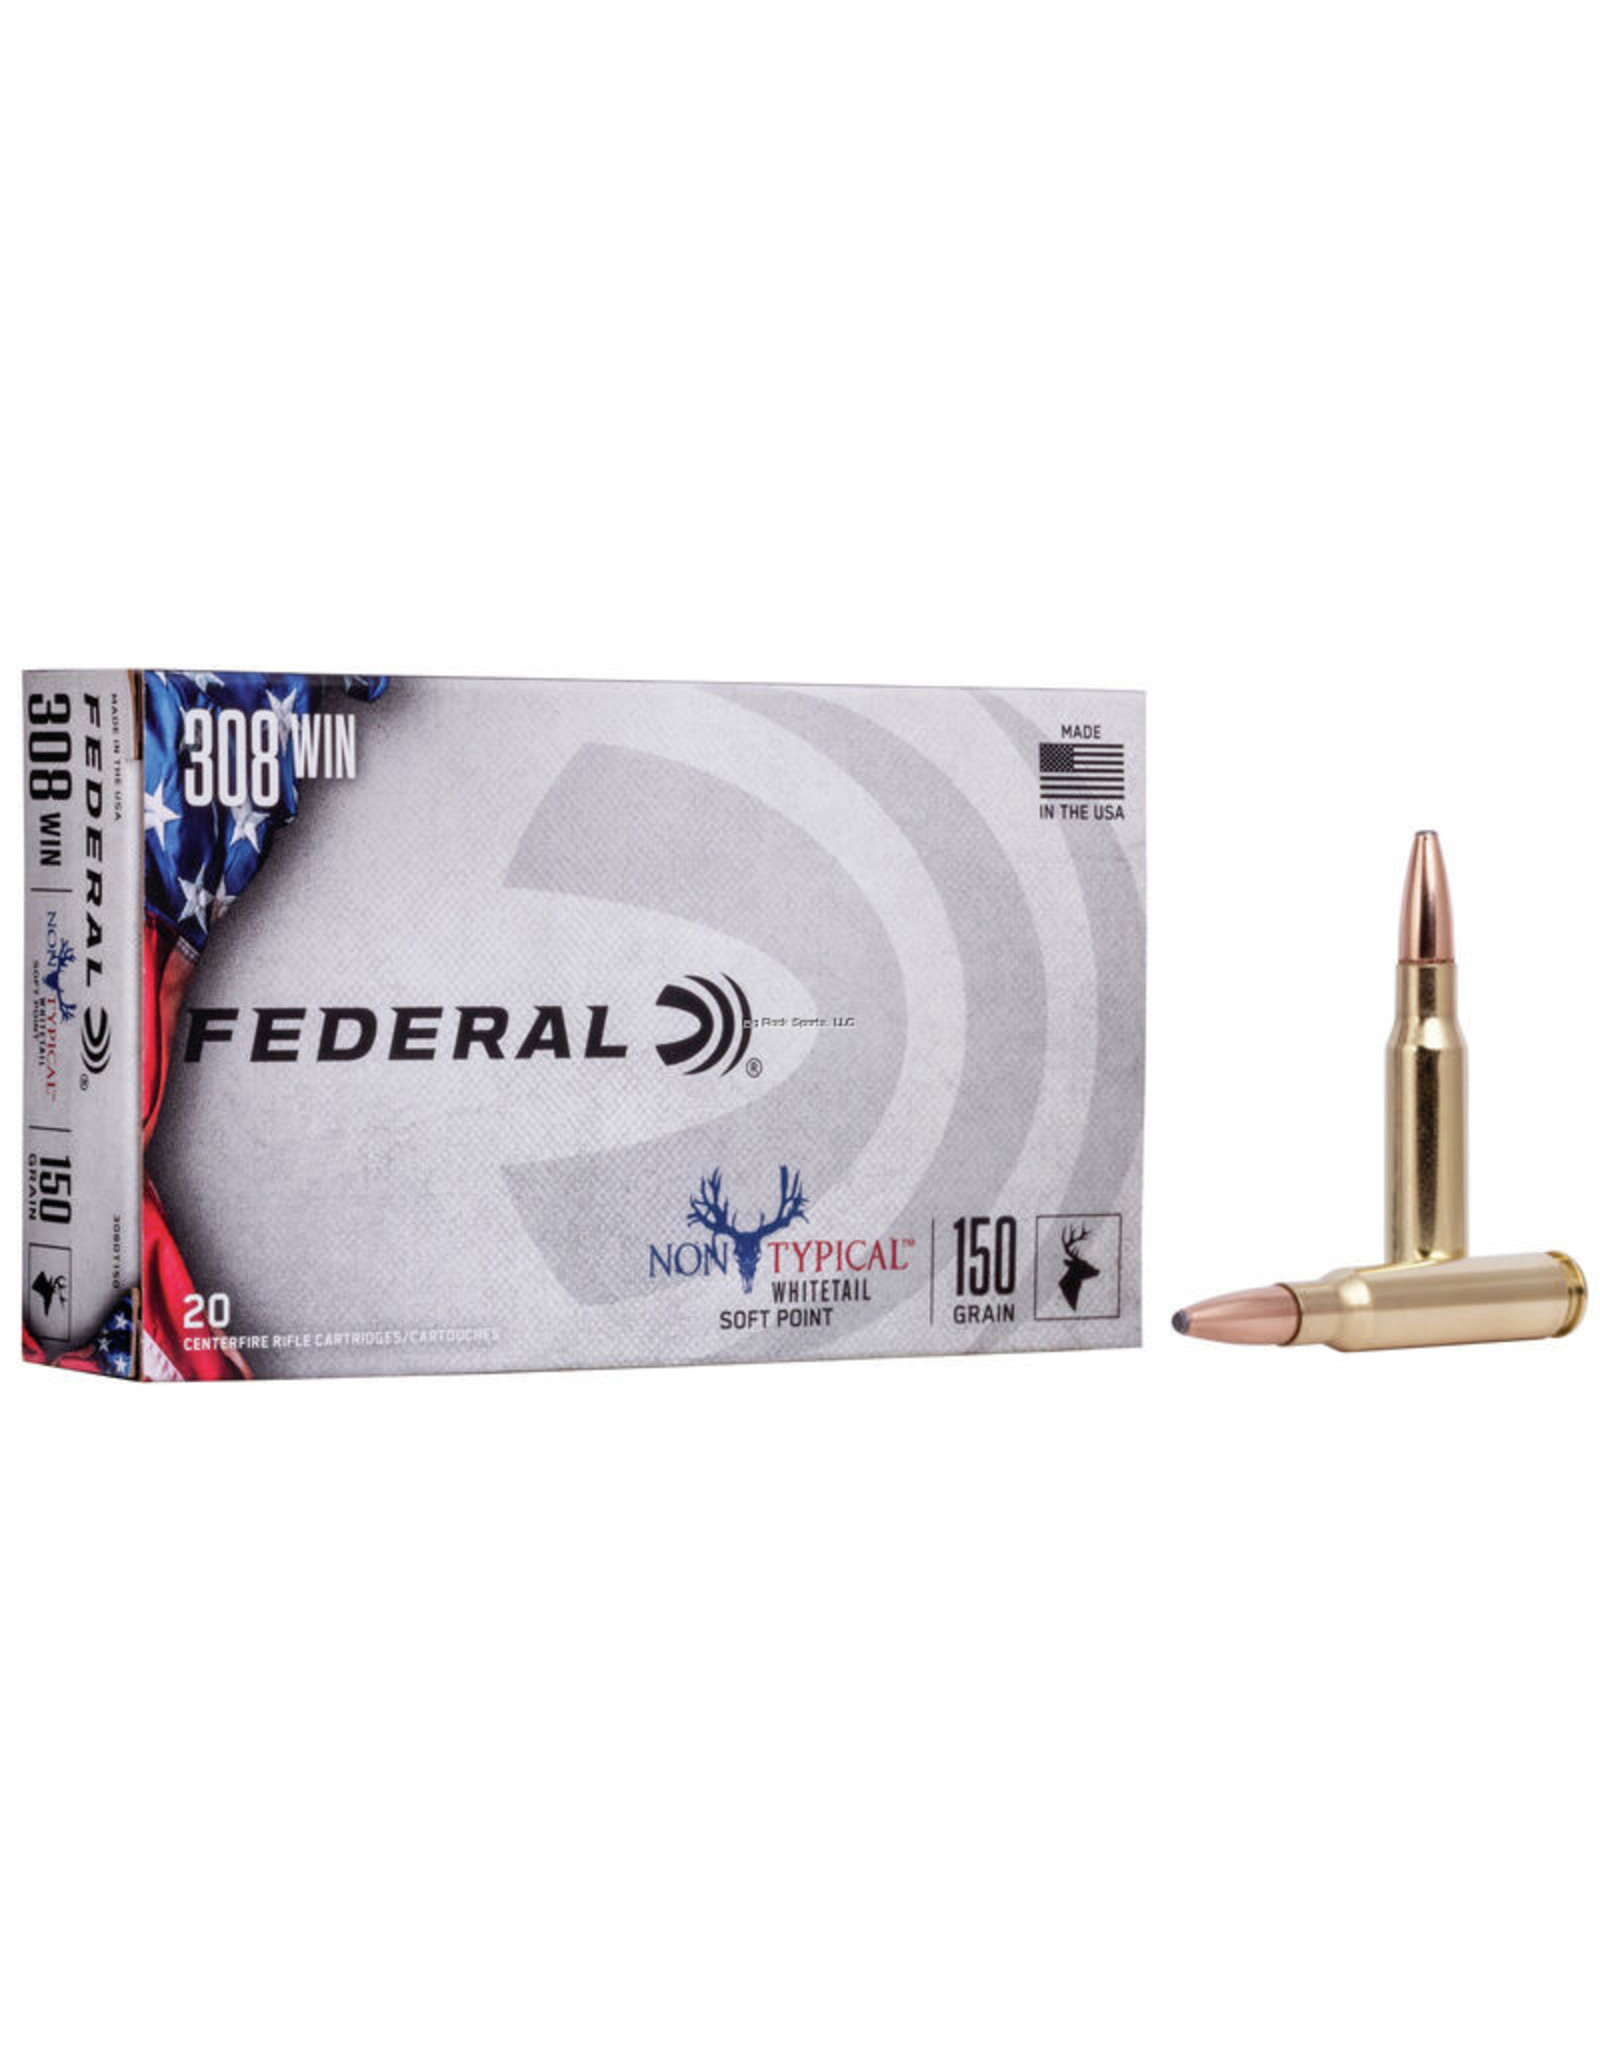 Federal Federal 308DT150 Non-Typical Rifle Ammo, 308 Win 150 Gr Soft Point, 20 Round Box